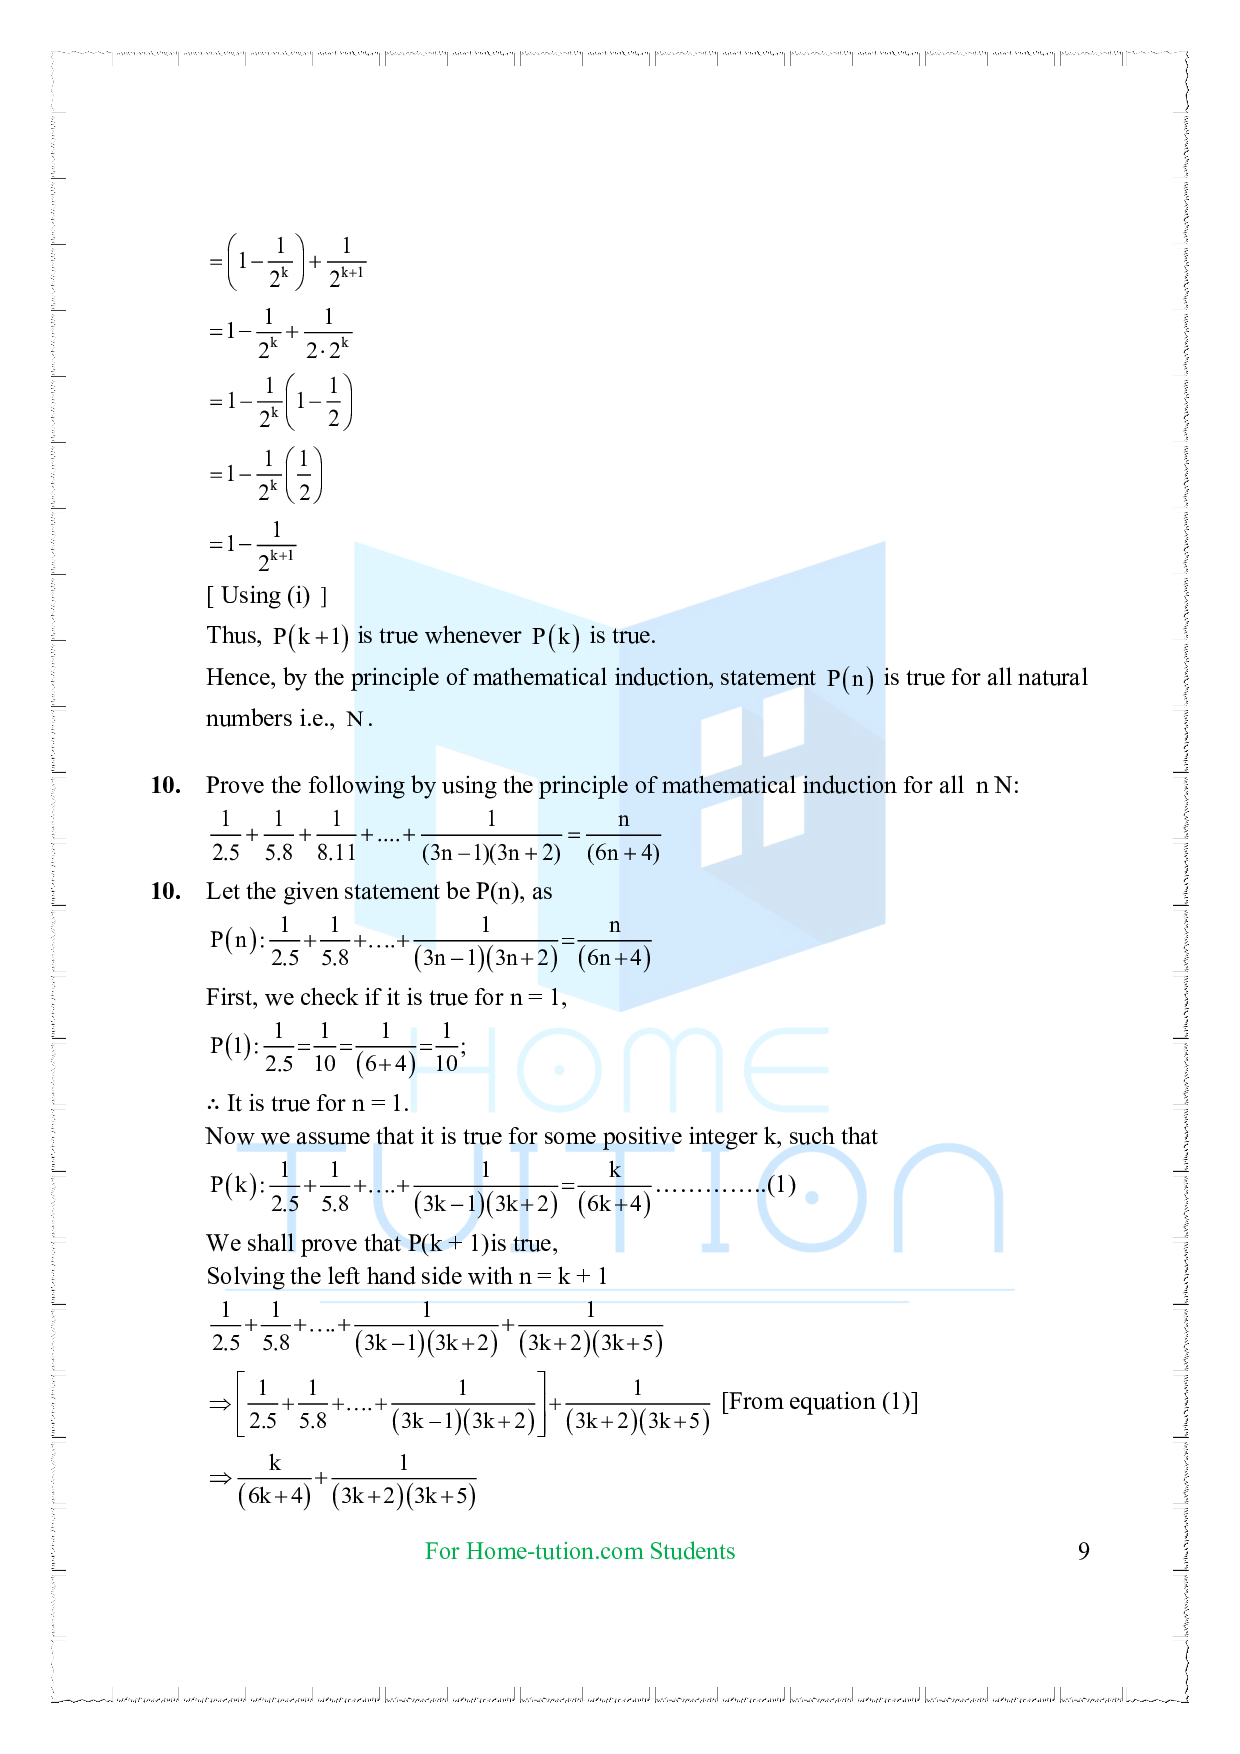 Chapter 4 Principle of Mathematical Induction